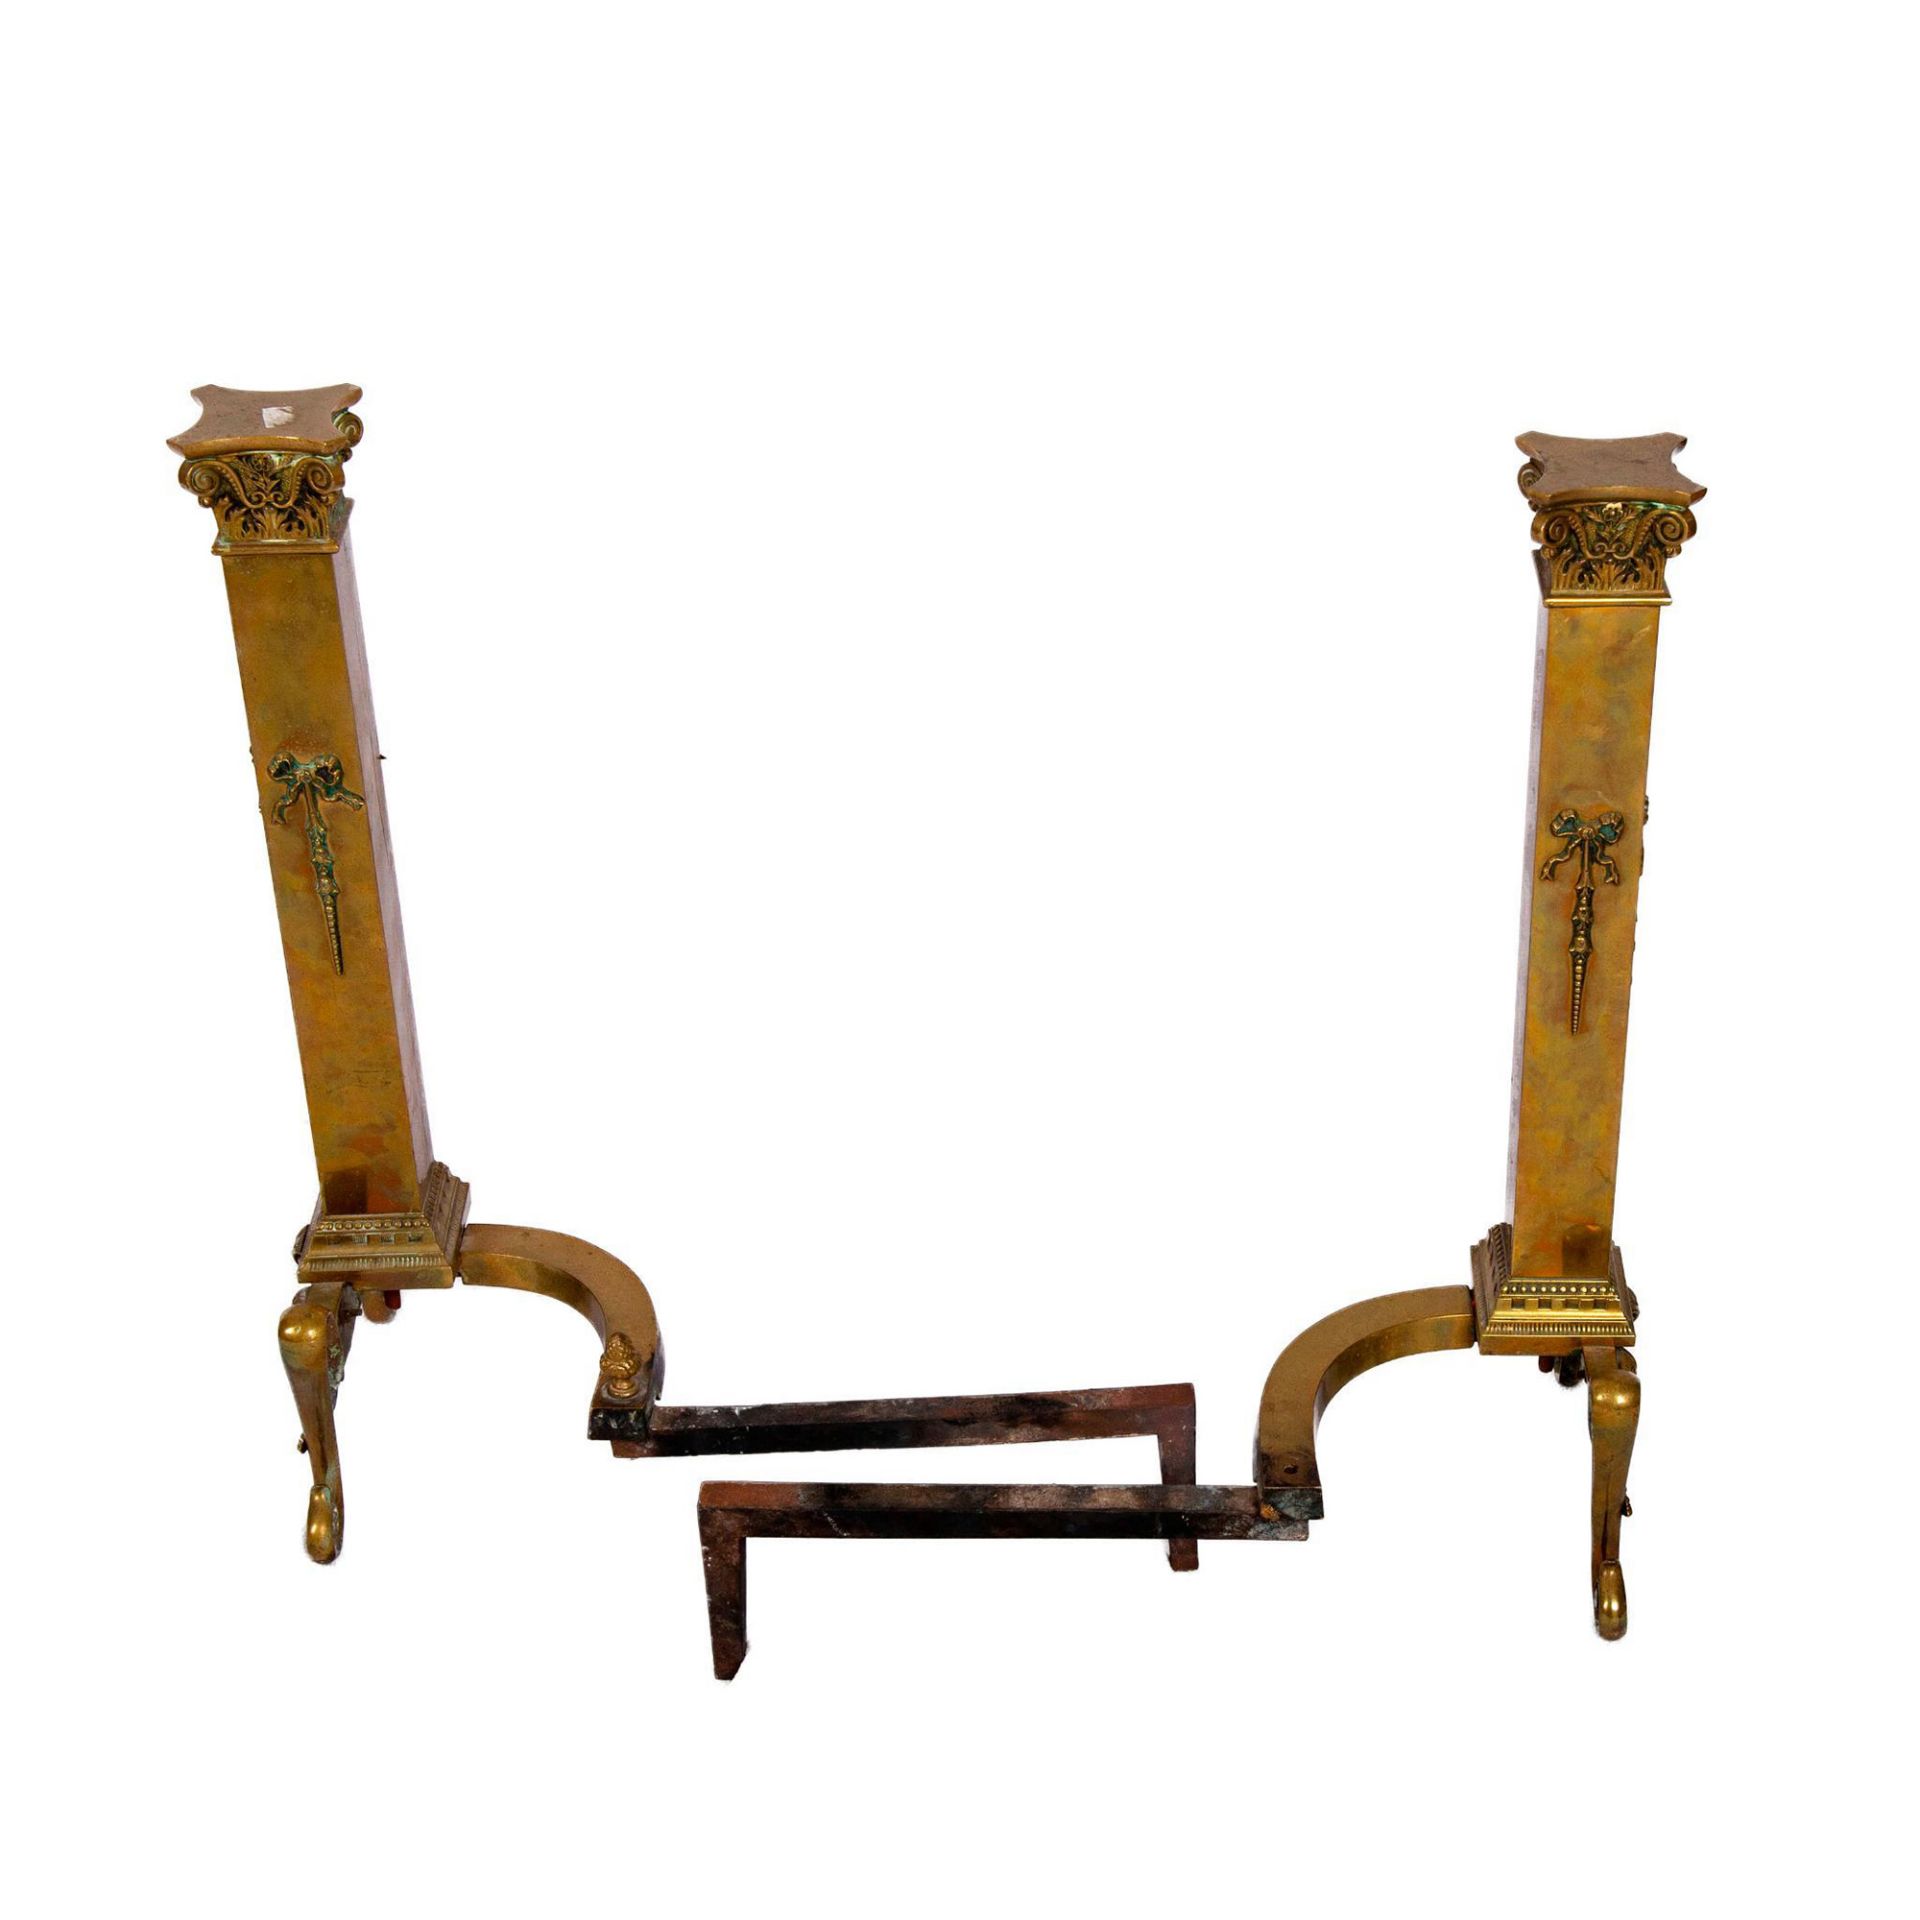 Pair of Vintage Brass Andirons - Image 2 of 5